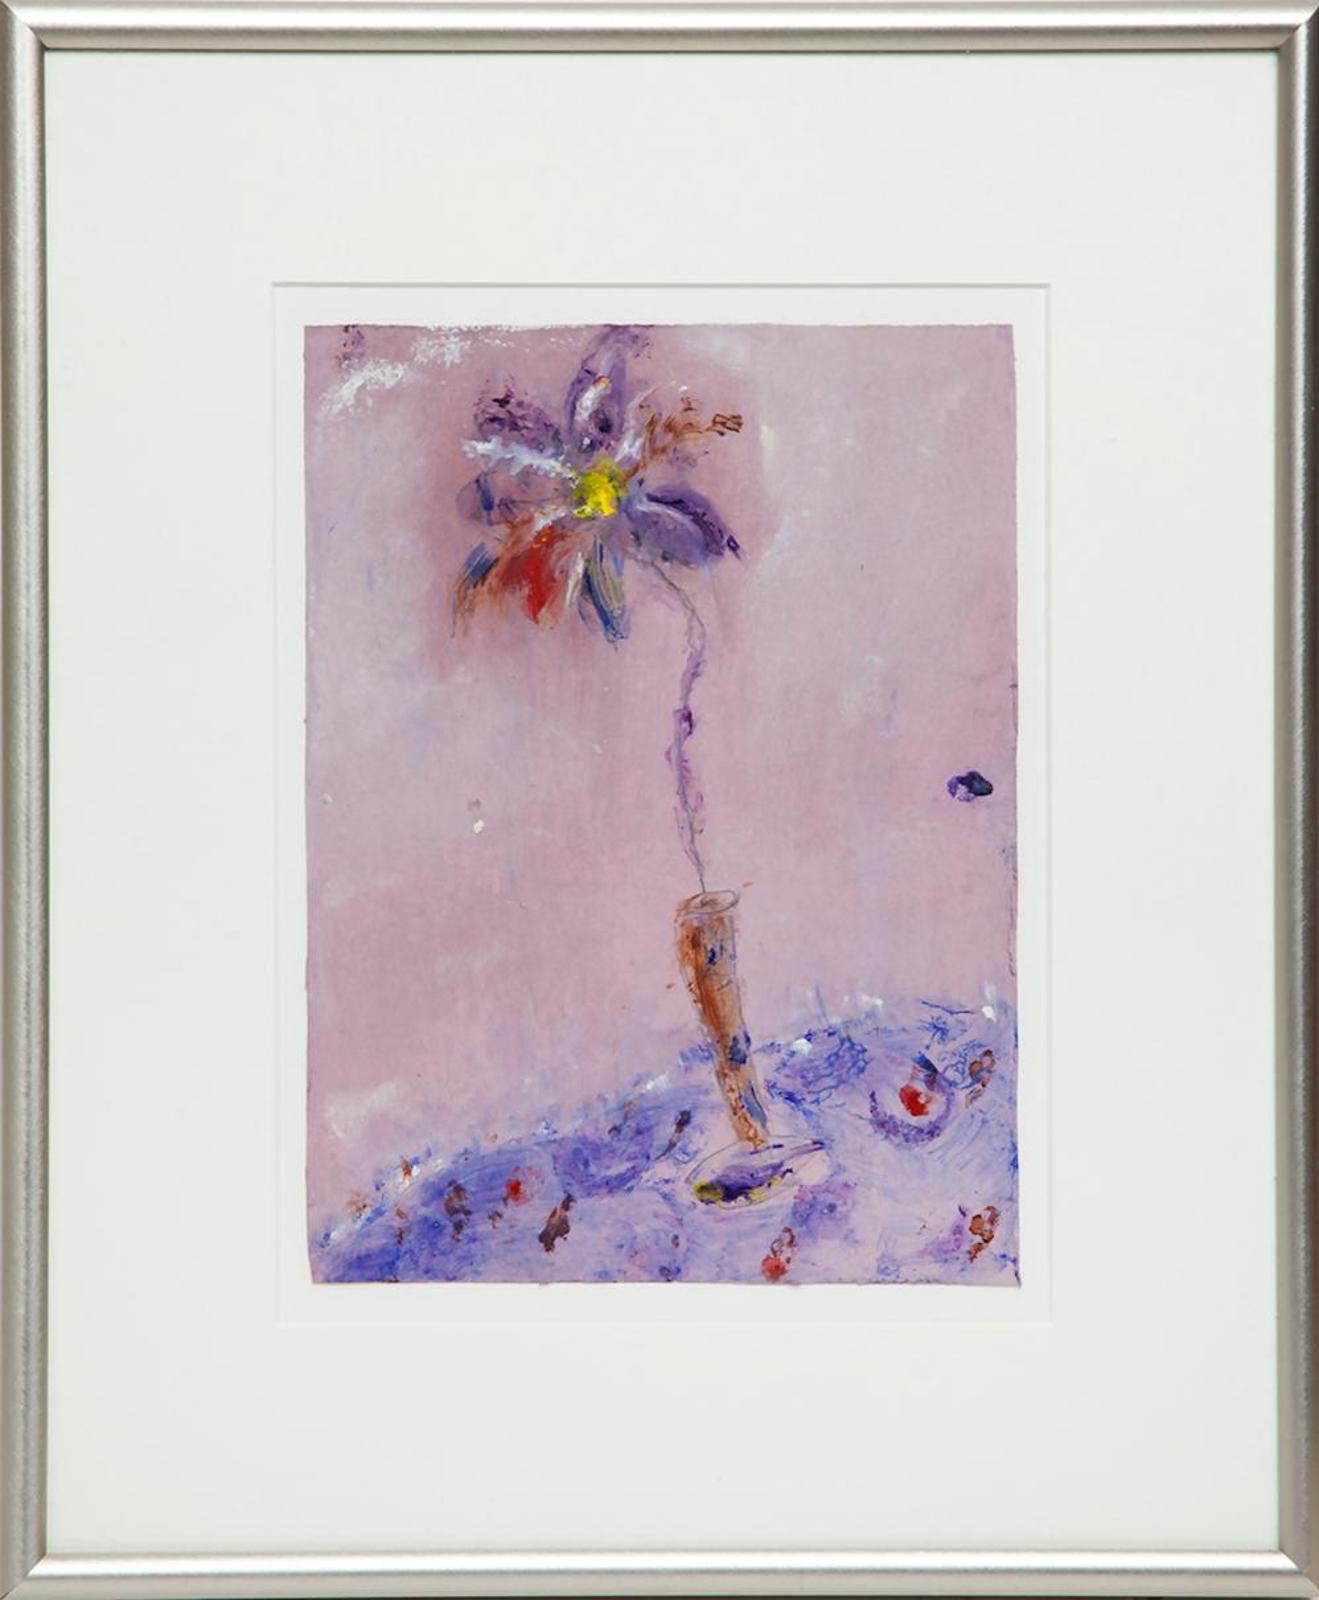 Lorraine Weidner - The Lives of Flowers 2